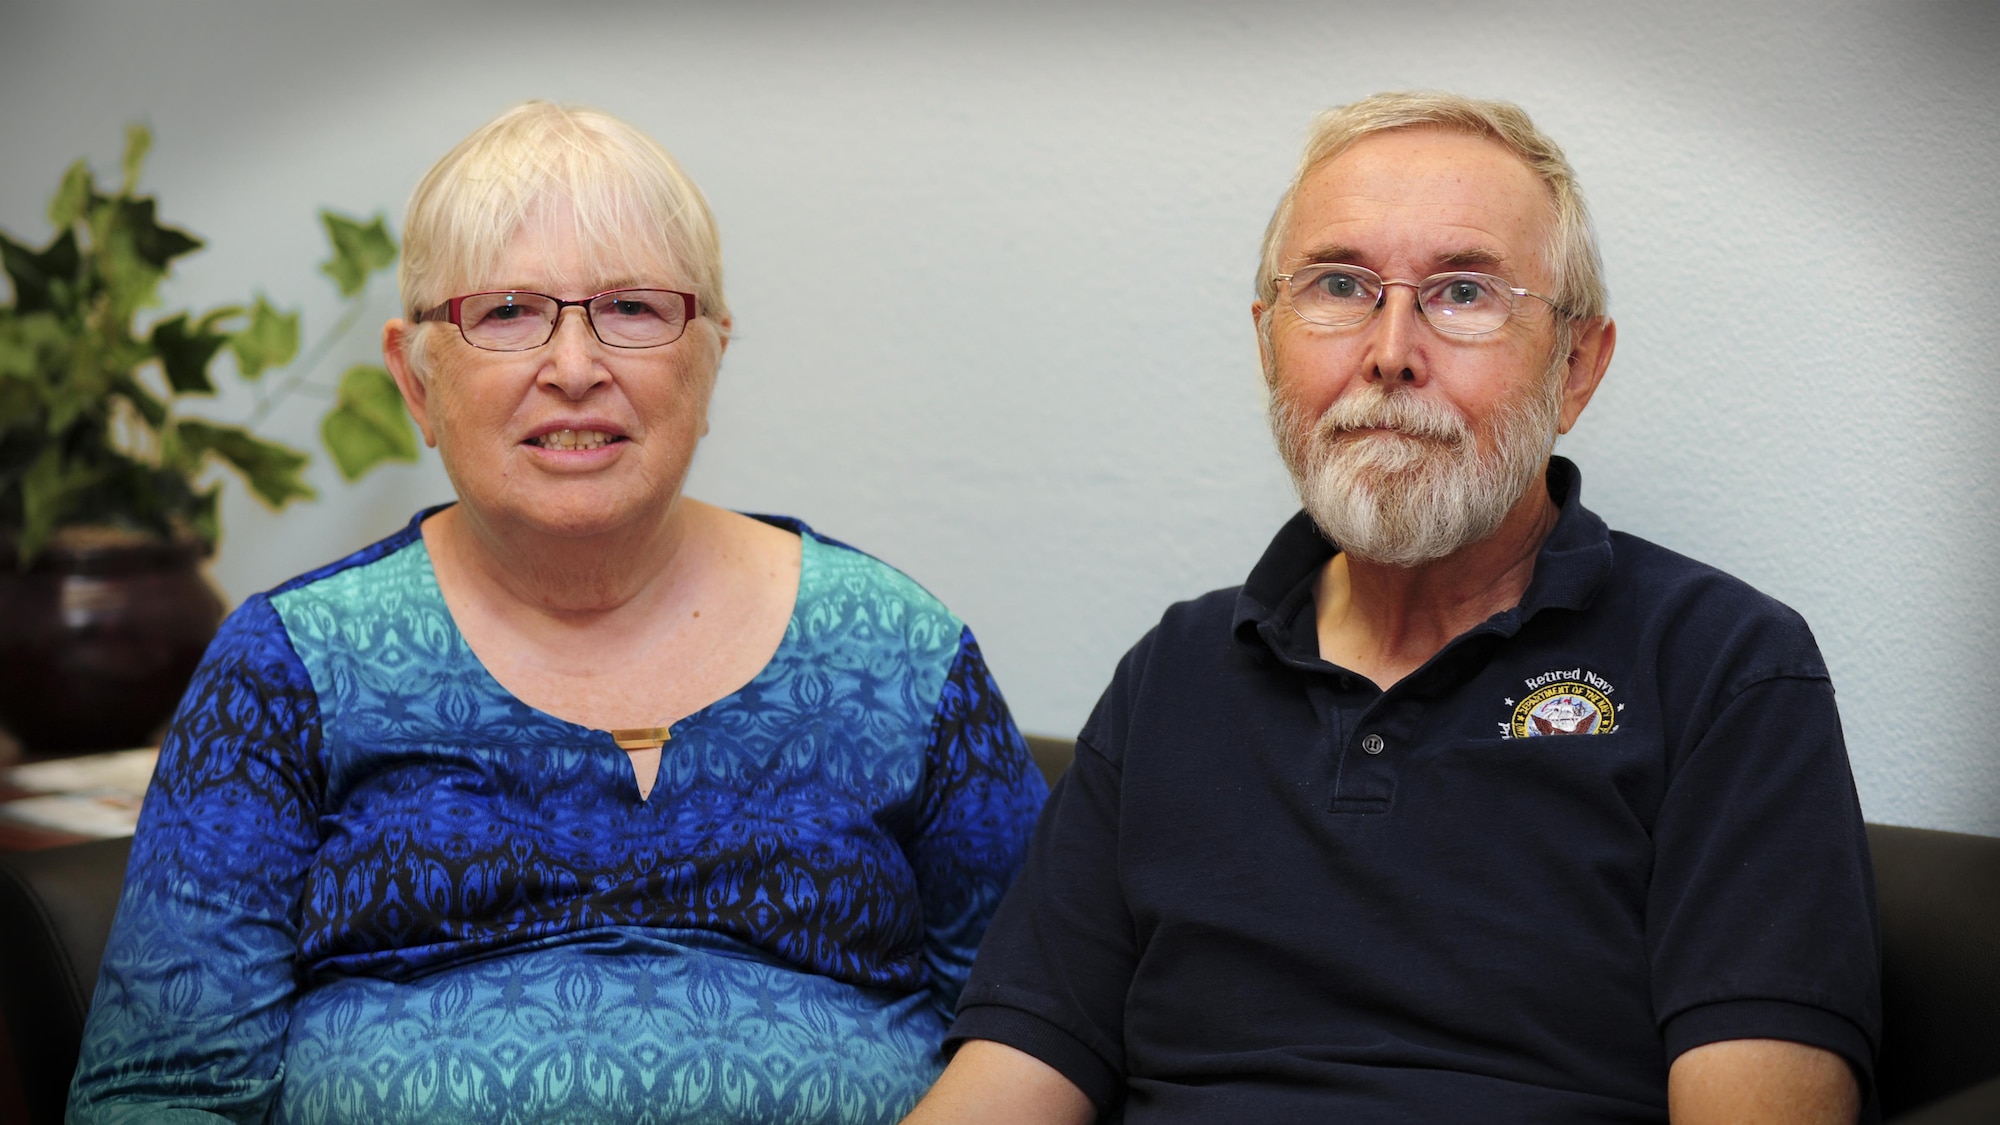 U.S. Navy retired Senior Chief Petty Officer Allen Estes, D-M’s Retiree Activities Office manager, and his wife Barbara Estes, D-M’s RAO editor and receptionist, pose for a portrait at Davis-Monthan Air Force Base, November 9, 2016. Alan and Barbara volunteer their time to provide services and information to retired service members in Tucson’s local area. (U.S. Air Force photo illustration by Airman Nathan H. Barbour)